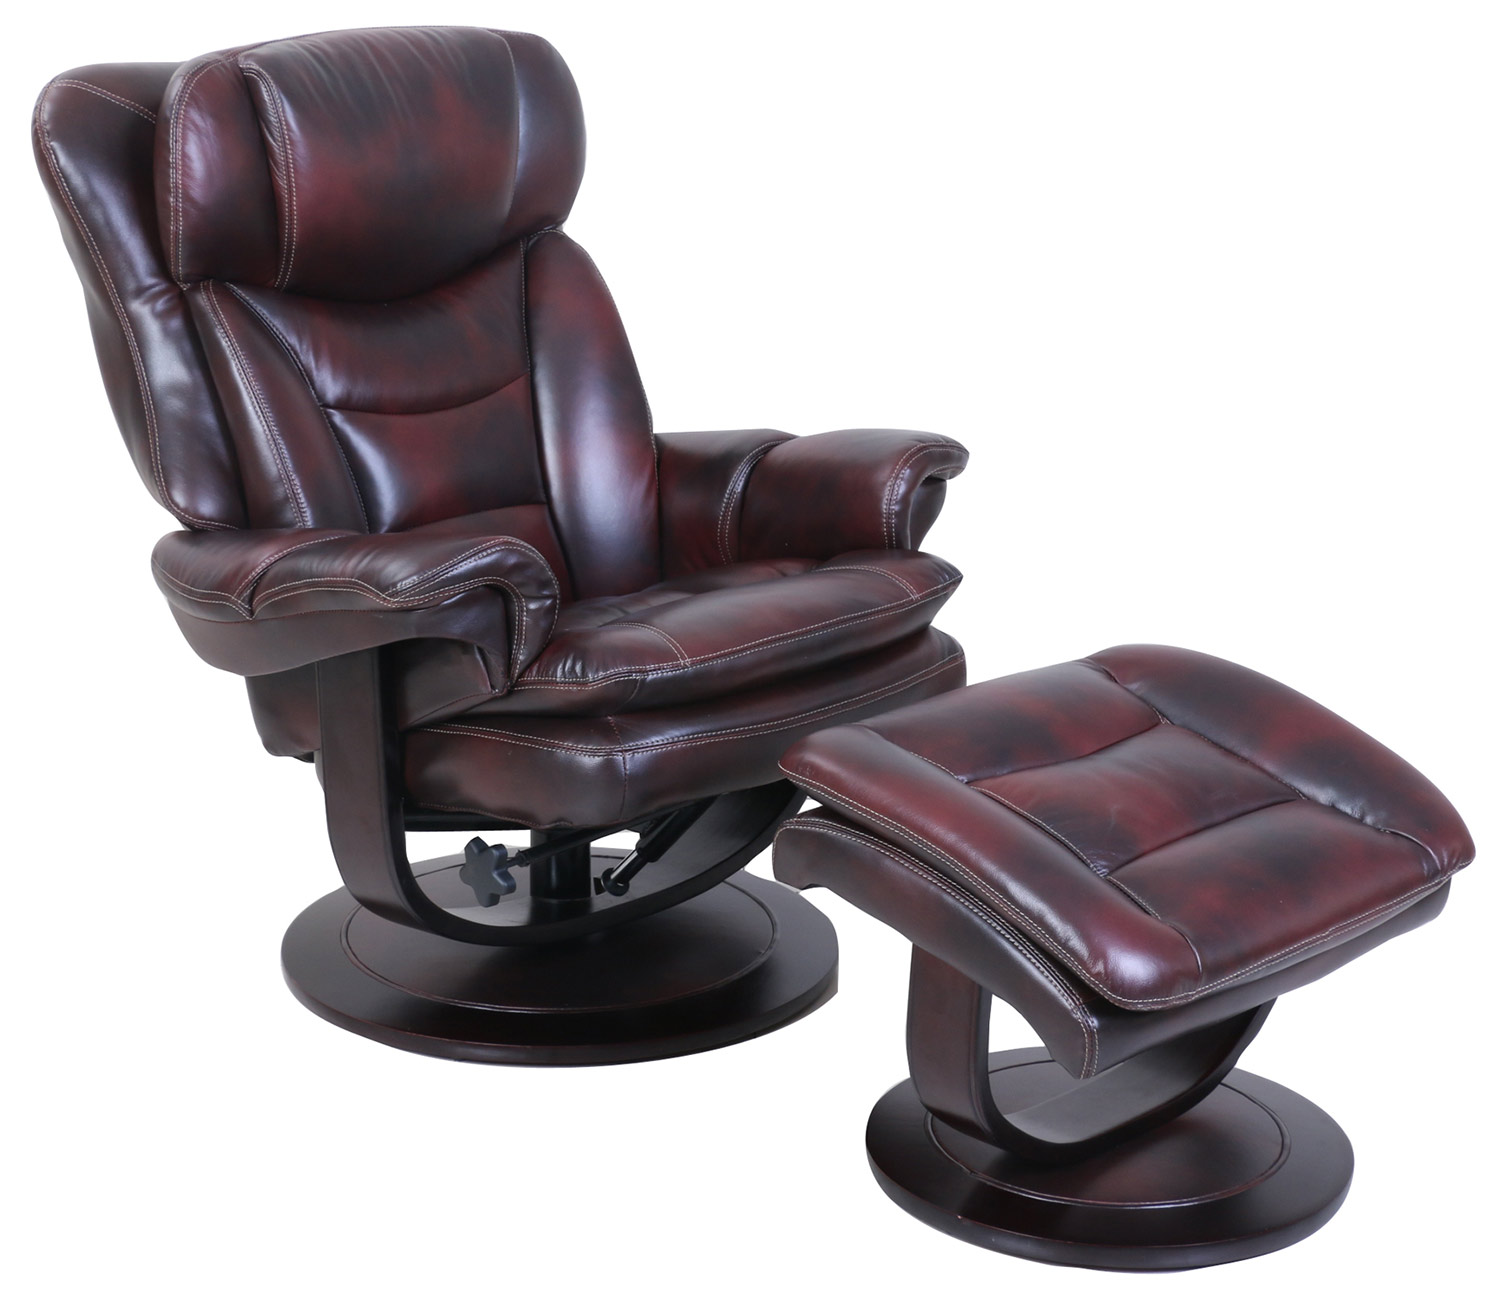 Barcalounger Roscoe Pedestal Recliner Chair and Ottoman - Plymouth Mahogany/Leather Match